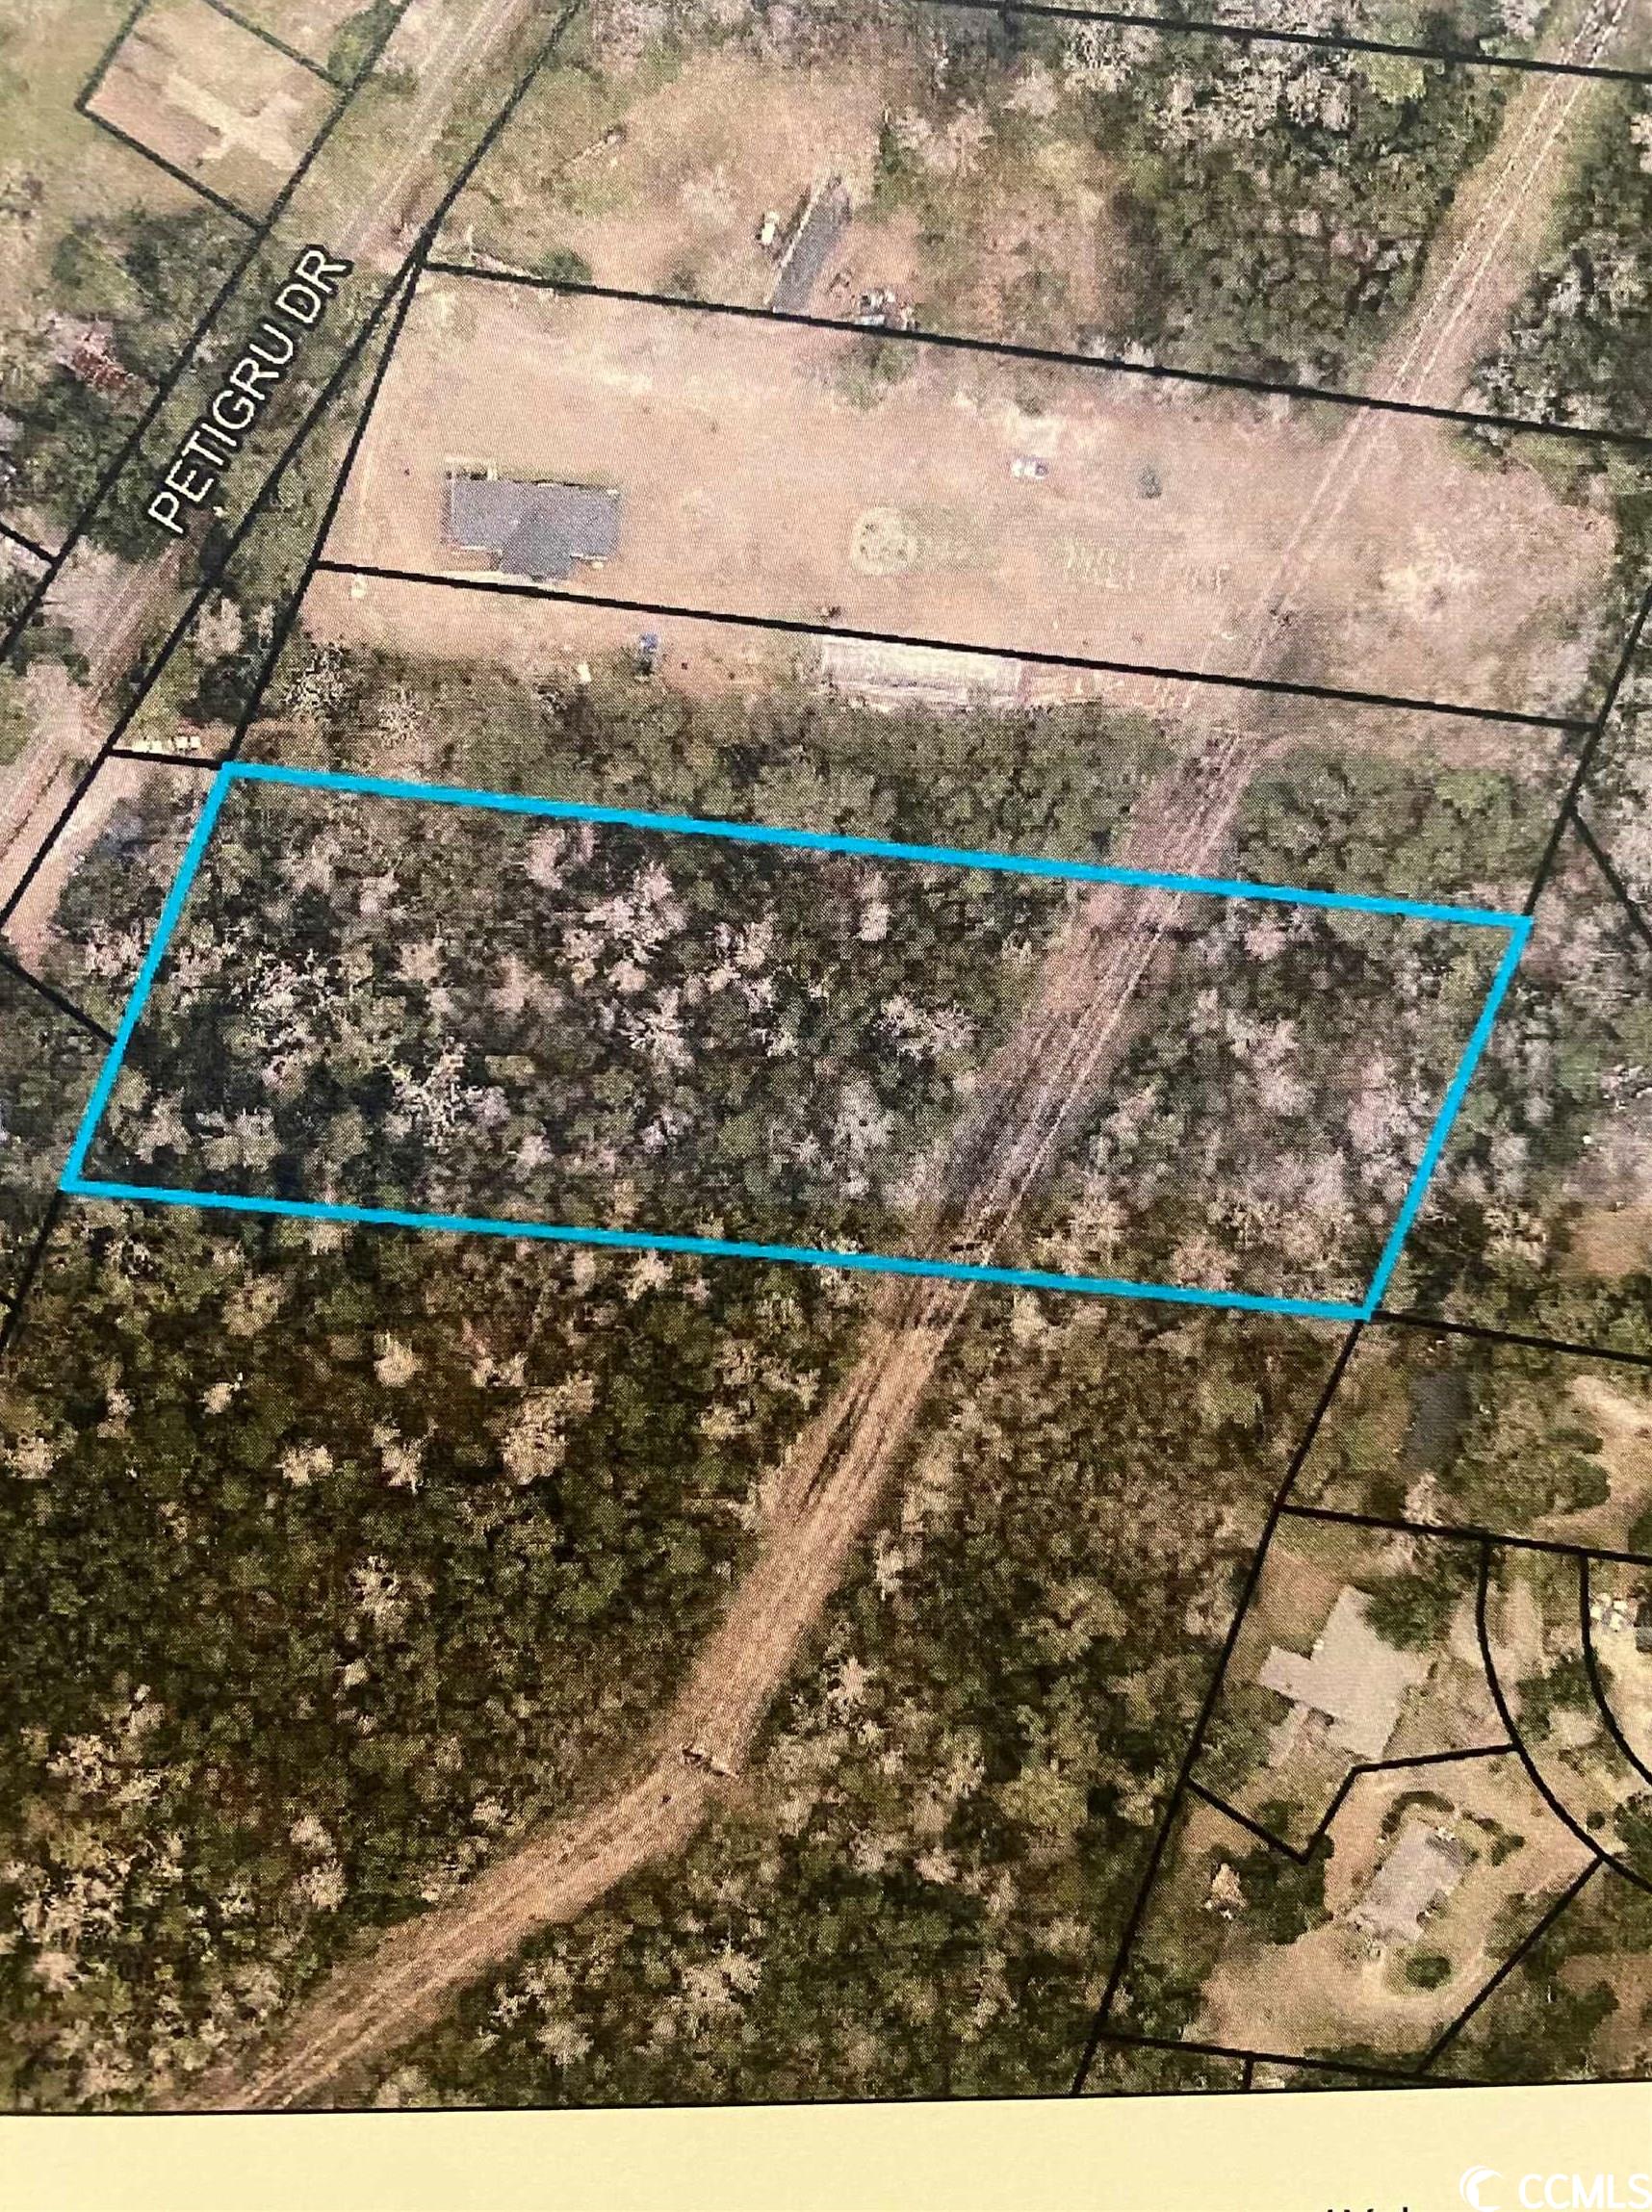 over 3 acres of land in the heart of pawleys island. located approximately between cvs drug store and pedigru dr this wooded area has lots of potential for a larger homesite, possible small development, or community park area. it is currently land locked on all sides and access would have to be acquired by buyers through an easement from neighboring property directly or through court approval using an attorney. there is currently a 70ft utility easement on the rear of property.  see pics for location and county maps for more information.